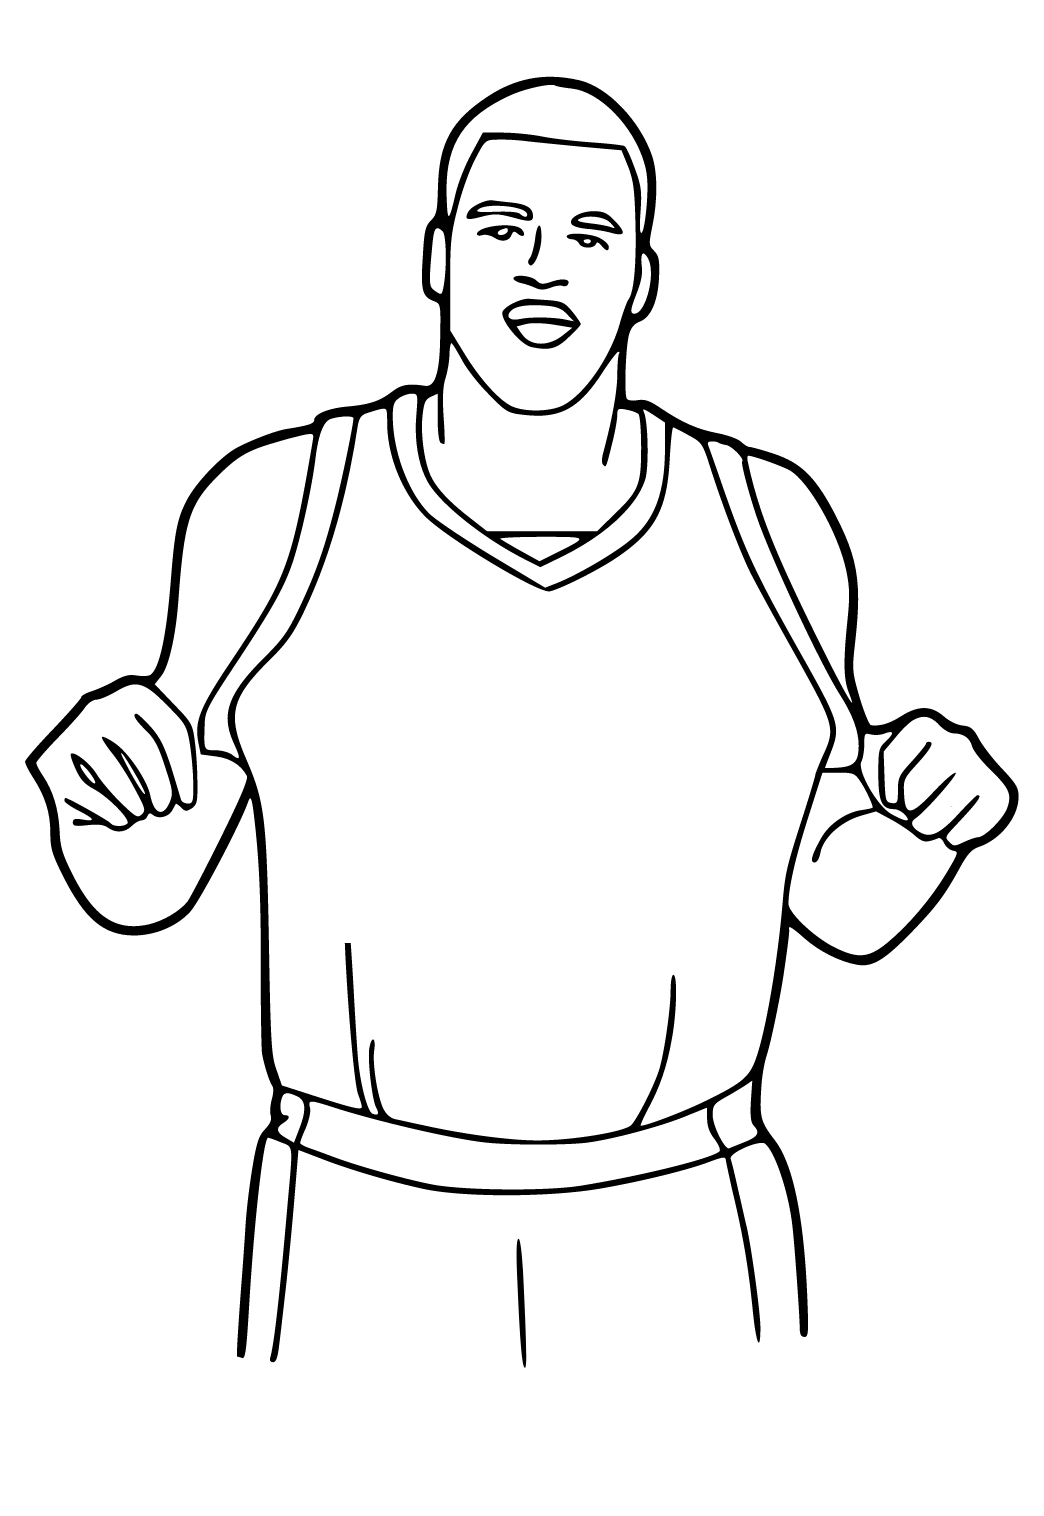 NBA Player PNG Image for Free Download